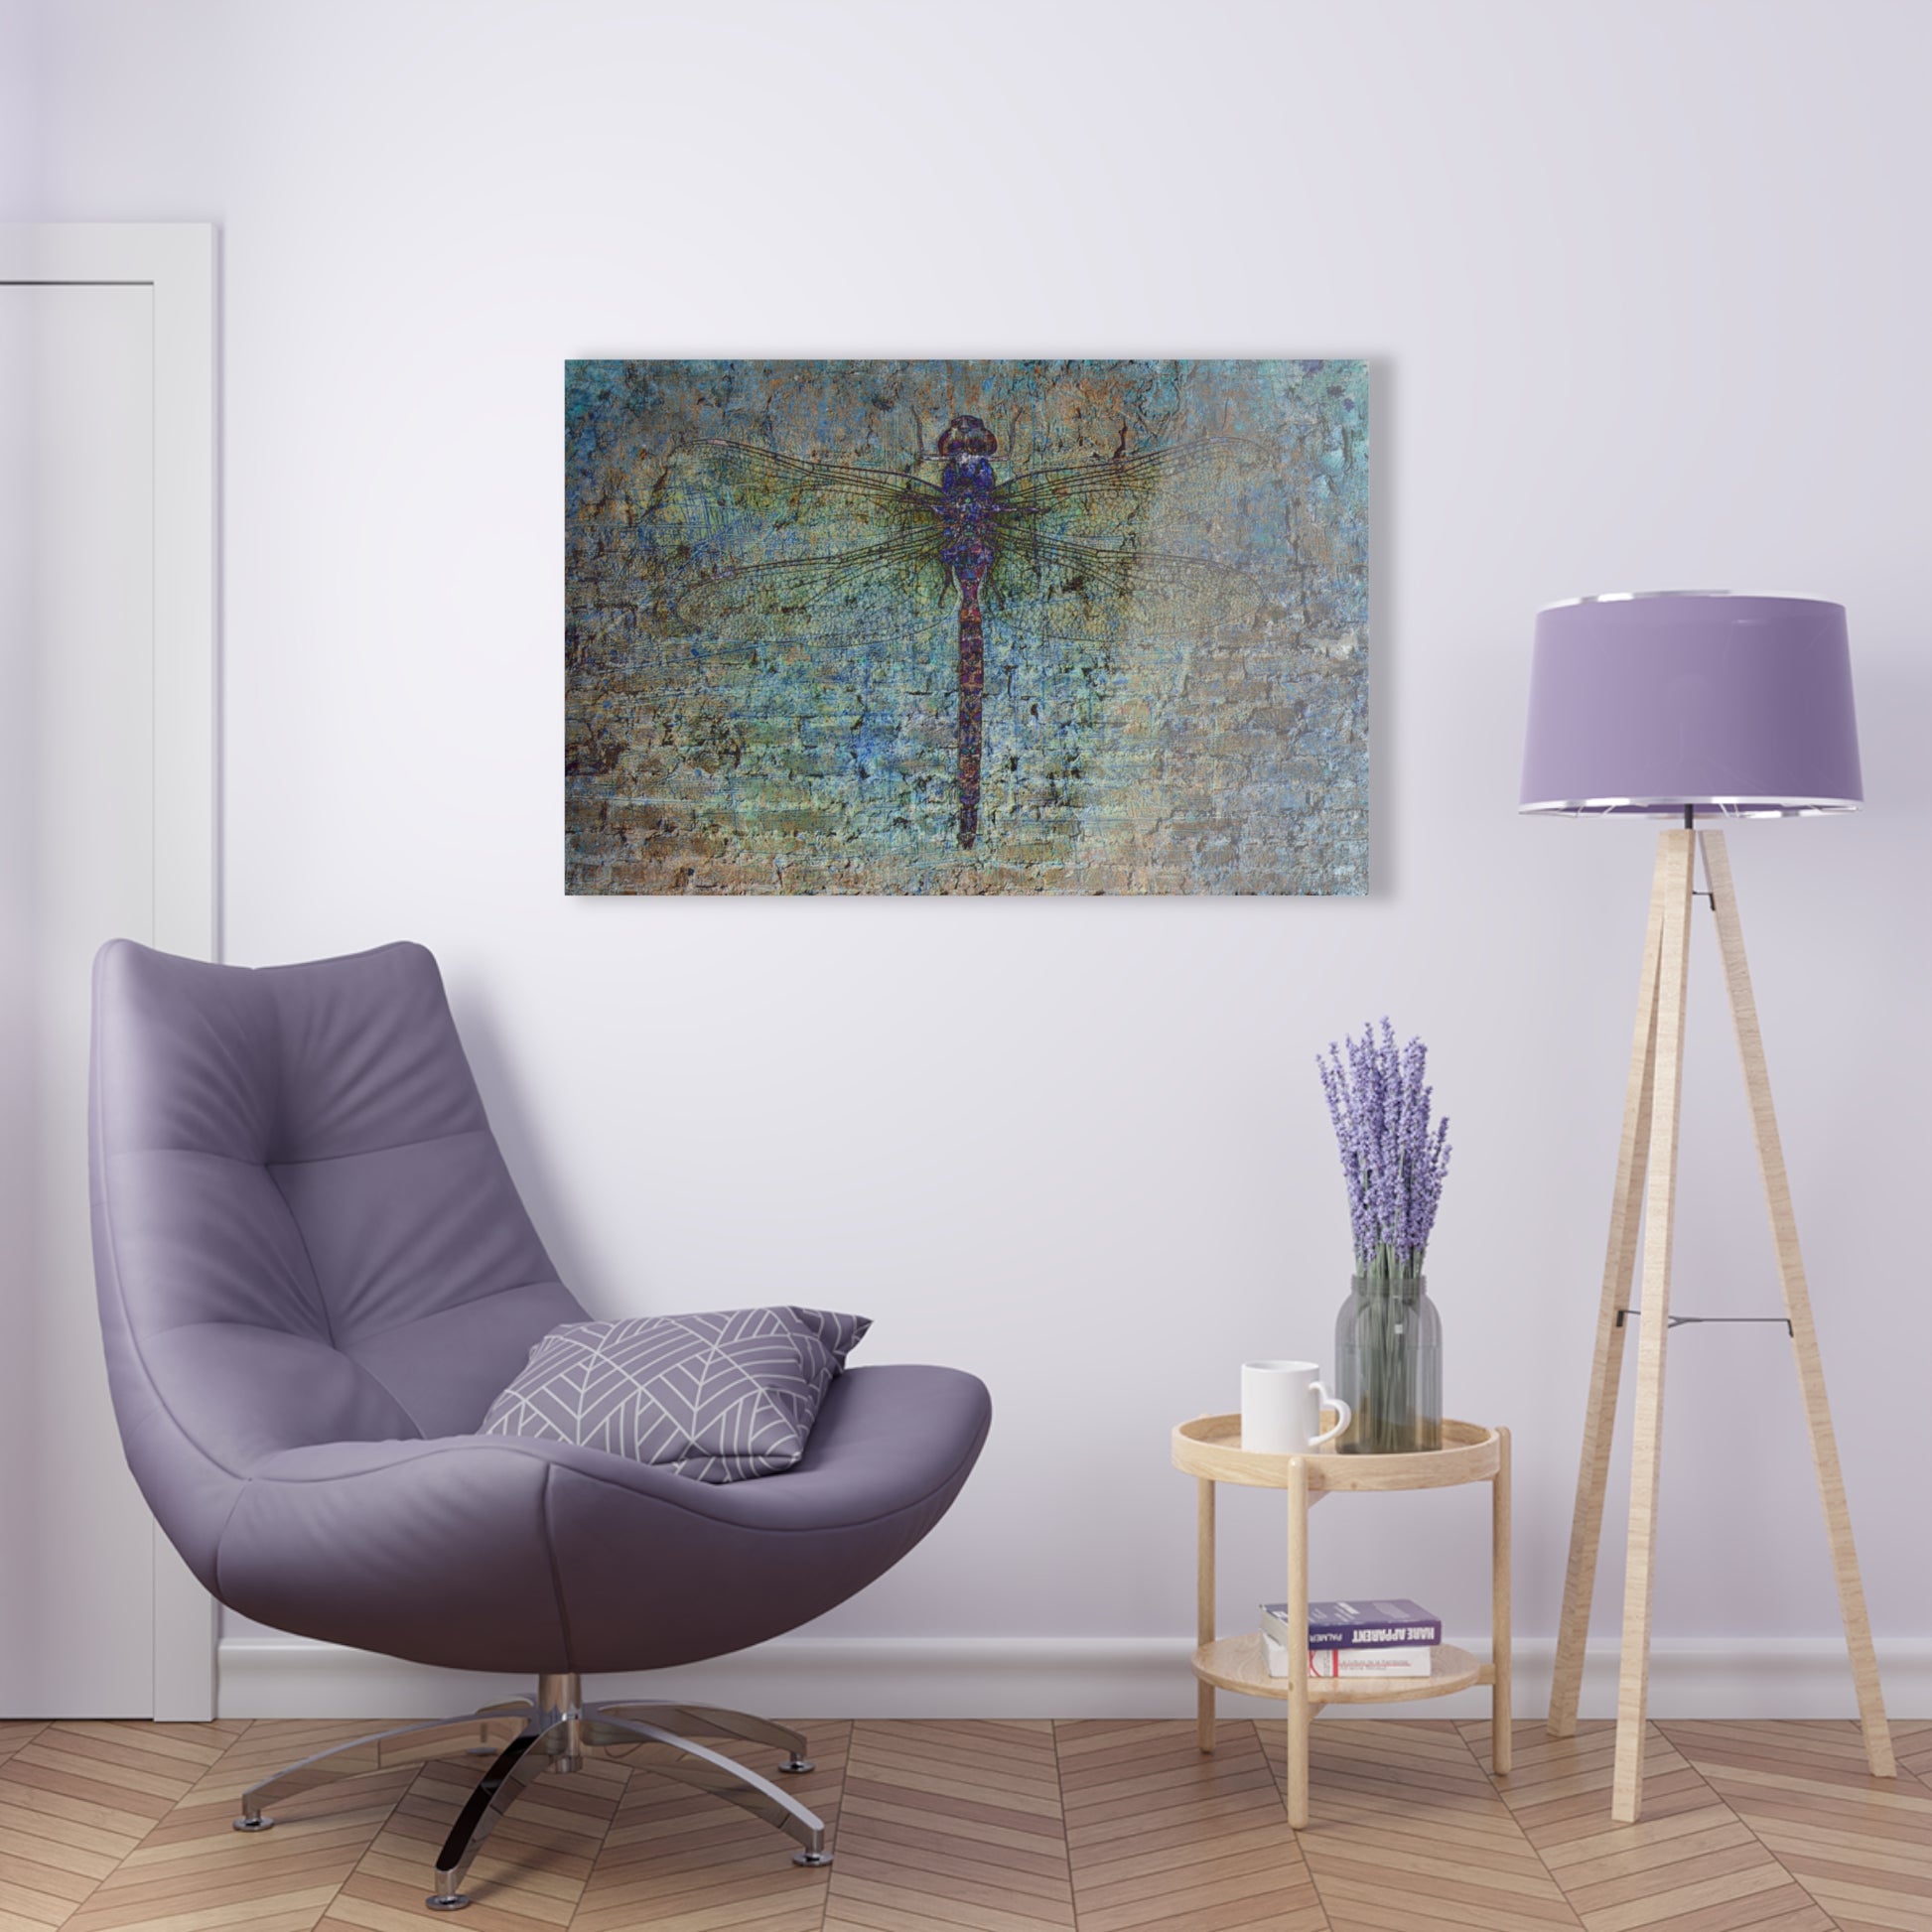 Dragonfly on Distressed Multicolor Brick Wall Printed on a Crystal Clear Acrylic Panel 36x24 hung in white wall